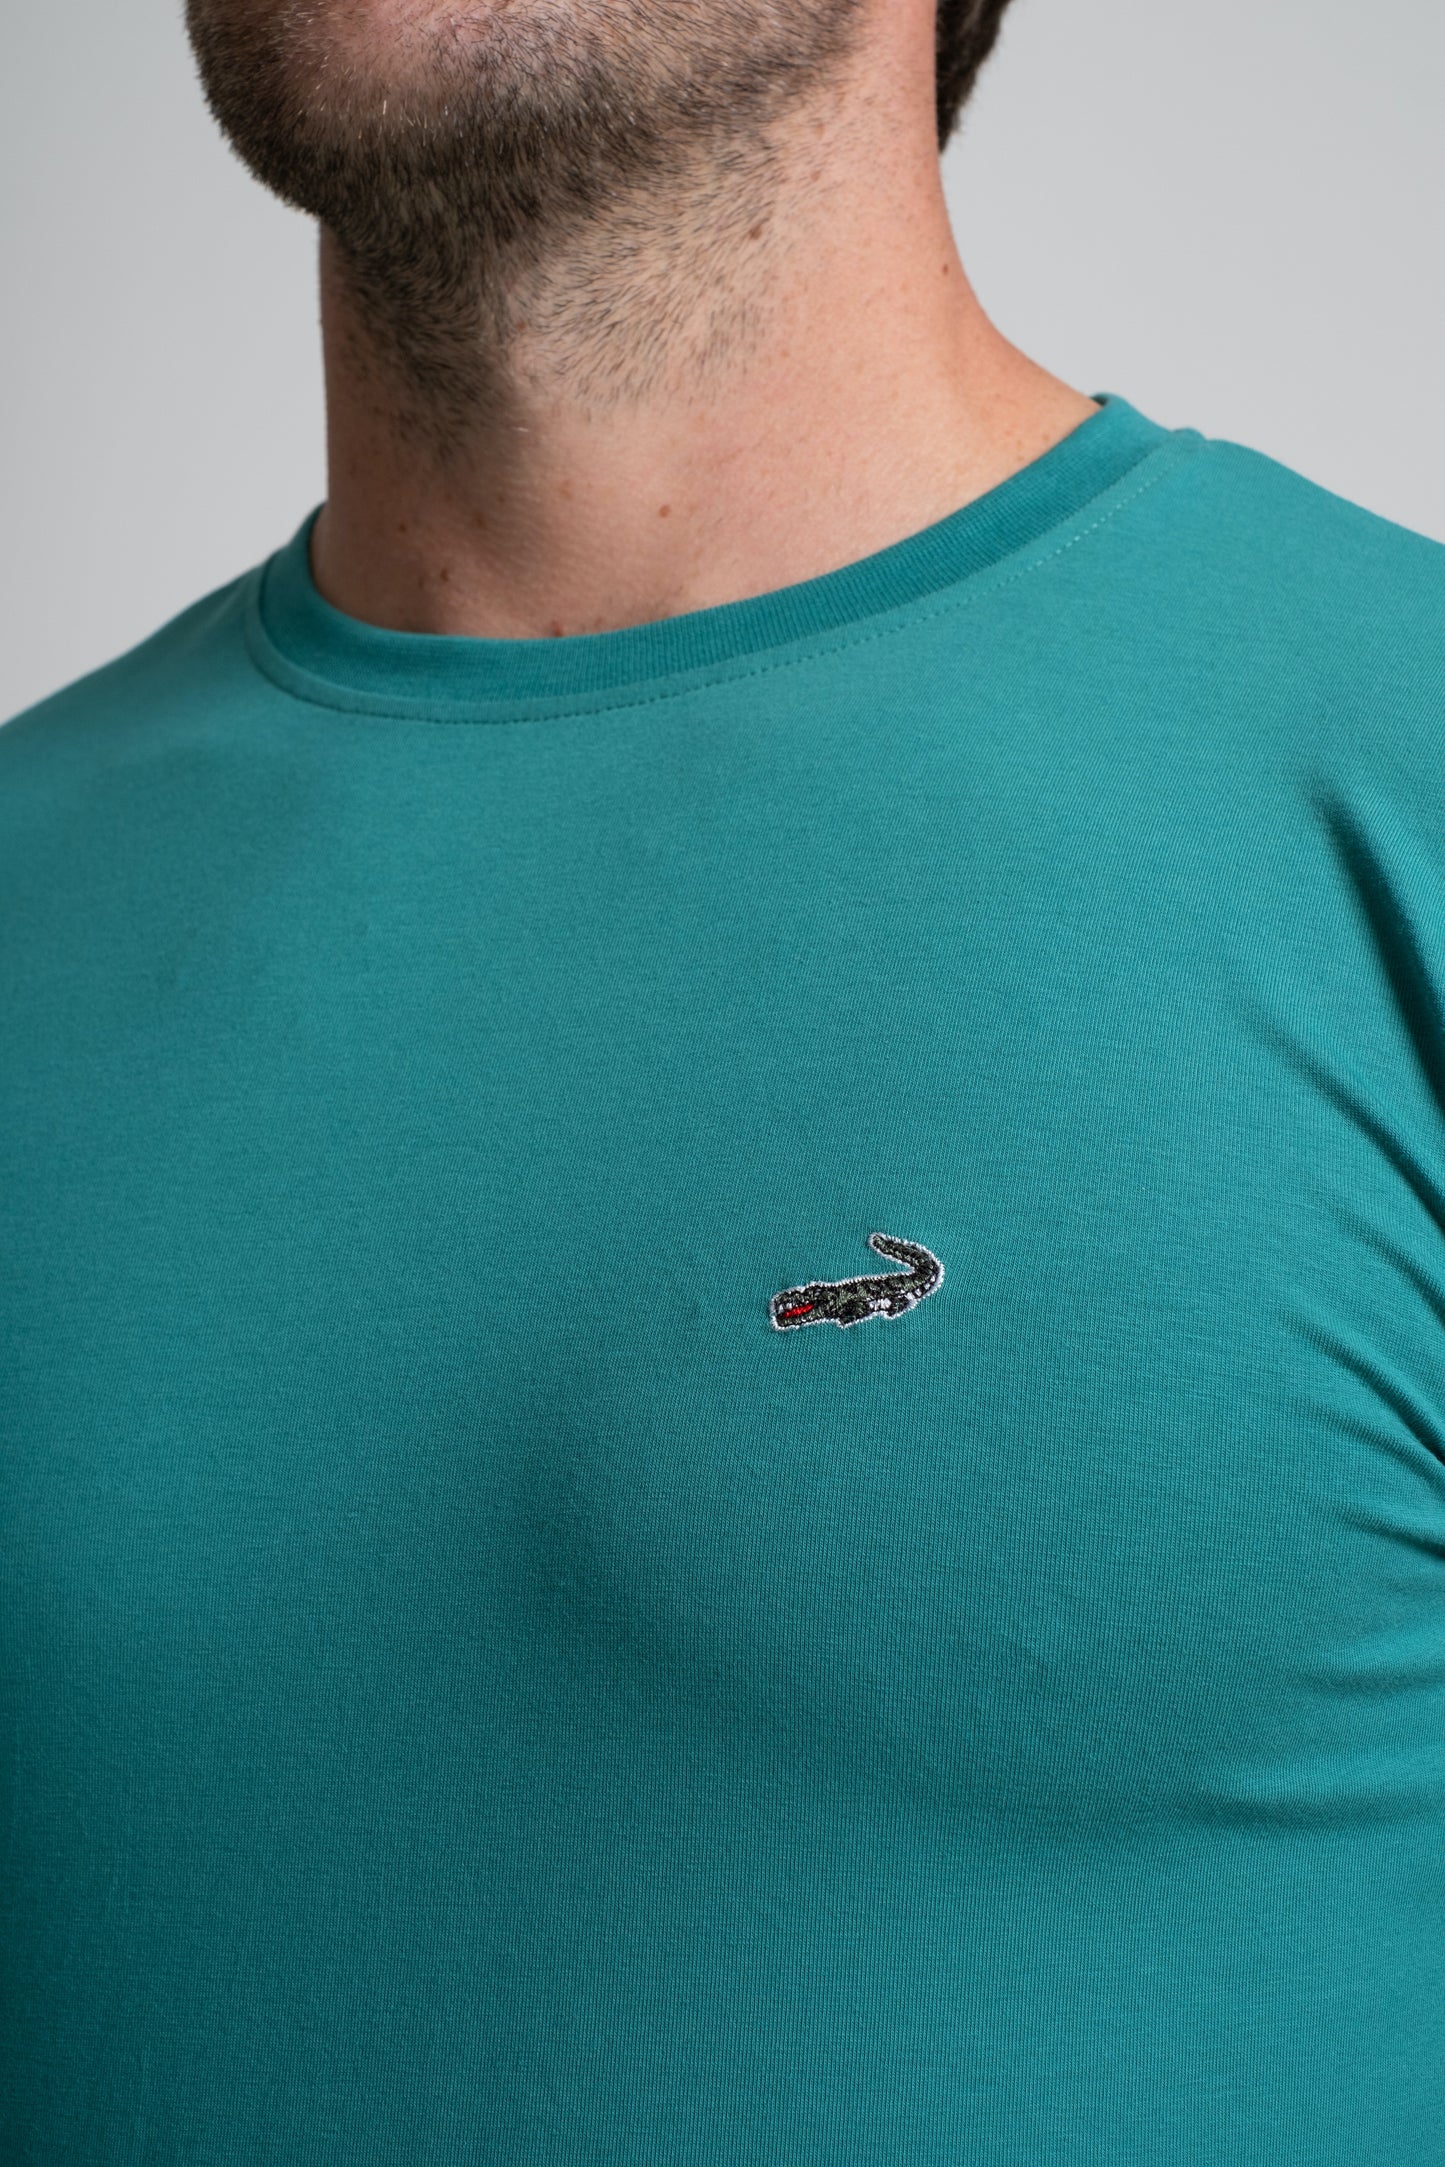 Action Fit Short sleeves-CasualCrew Neck - Green Alhambra